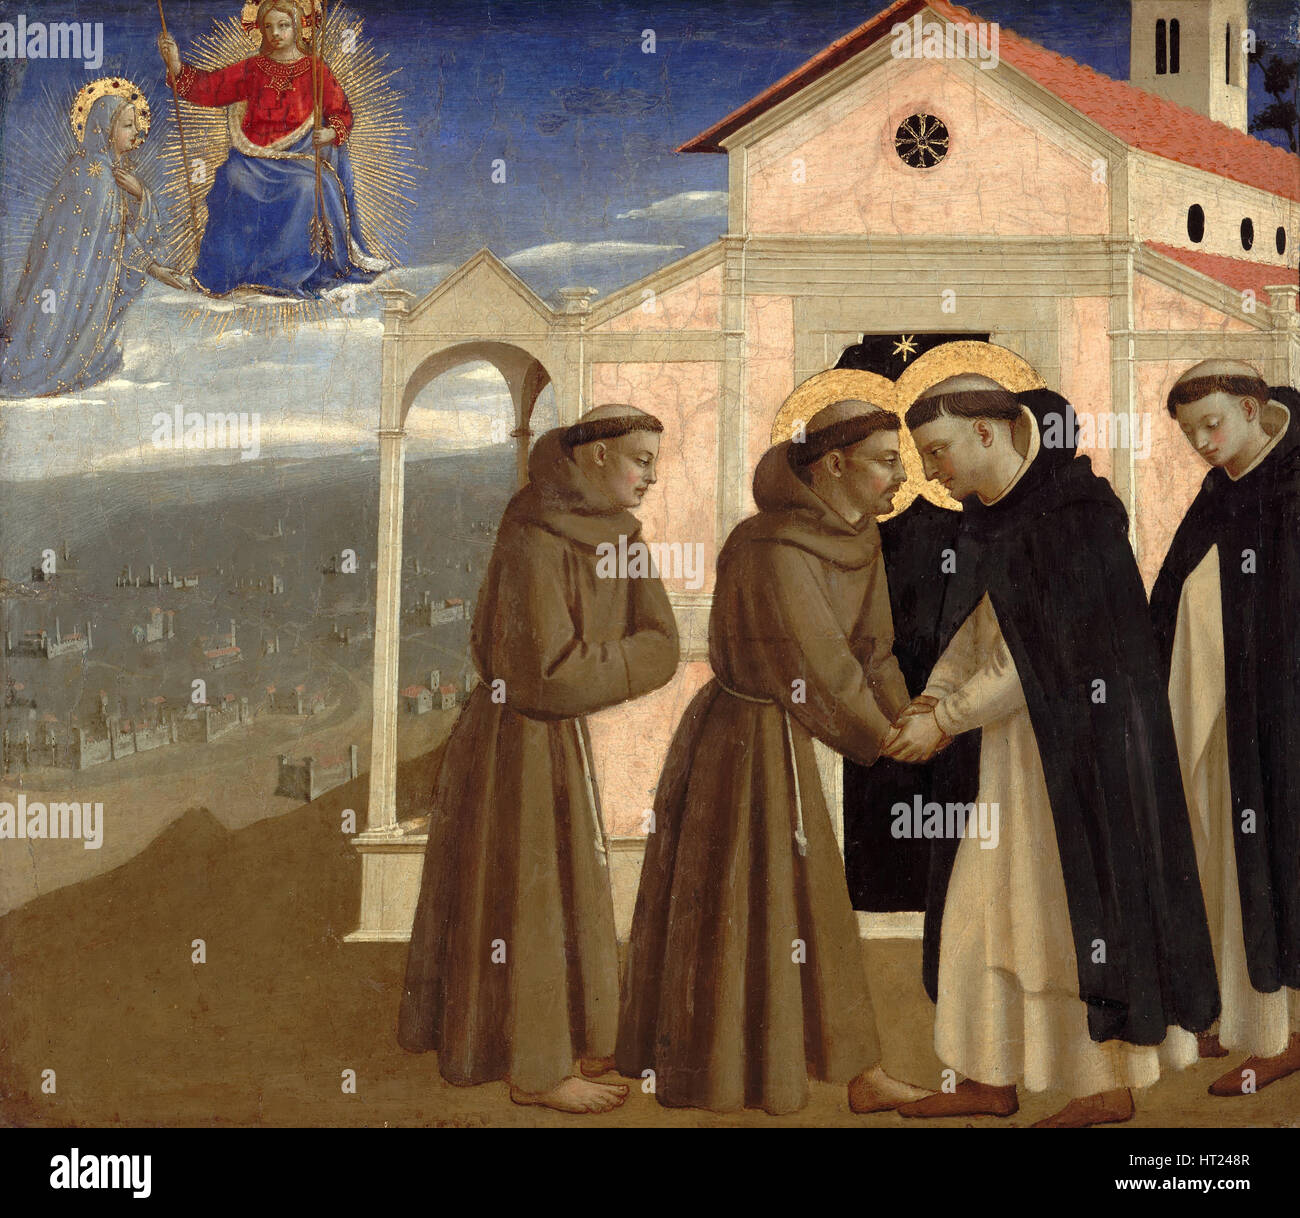 Meeting of Saint Francis and Saint Dominic (Scenes from the life of Saint Francis of Assisi), ca 142 Artist: Angelico, Fra Giovanni, da Fiesole (ca. 1 Stock Photo